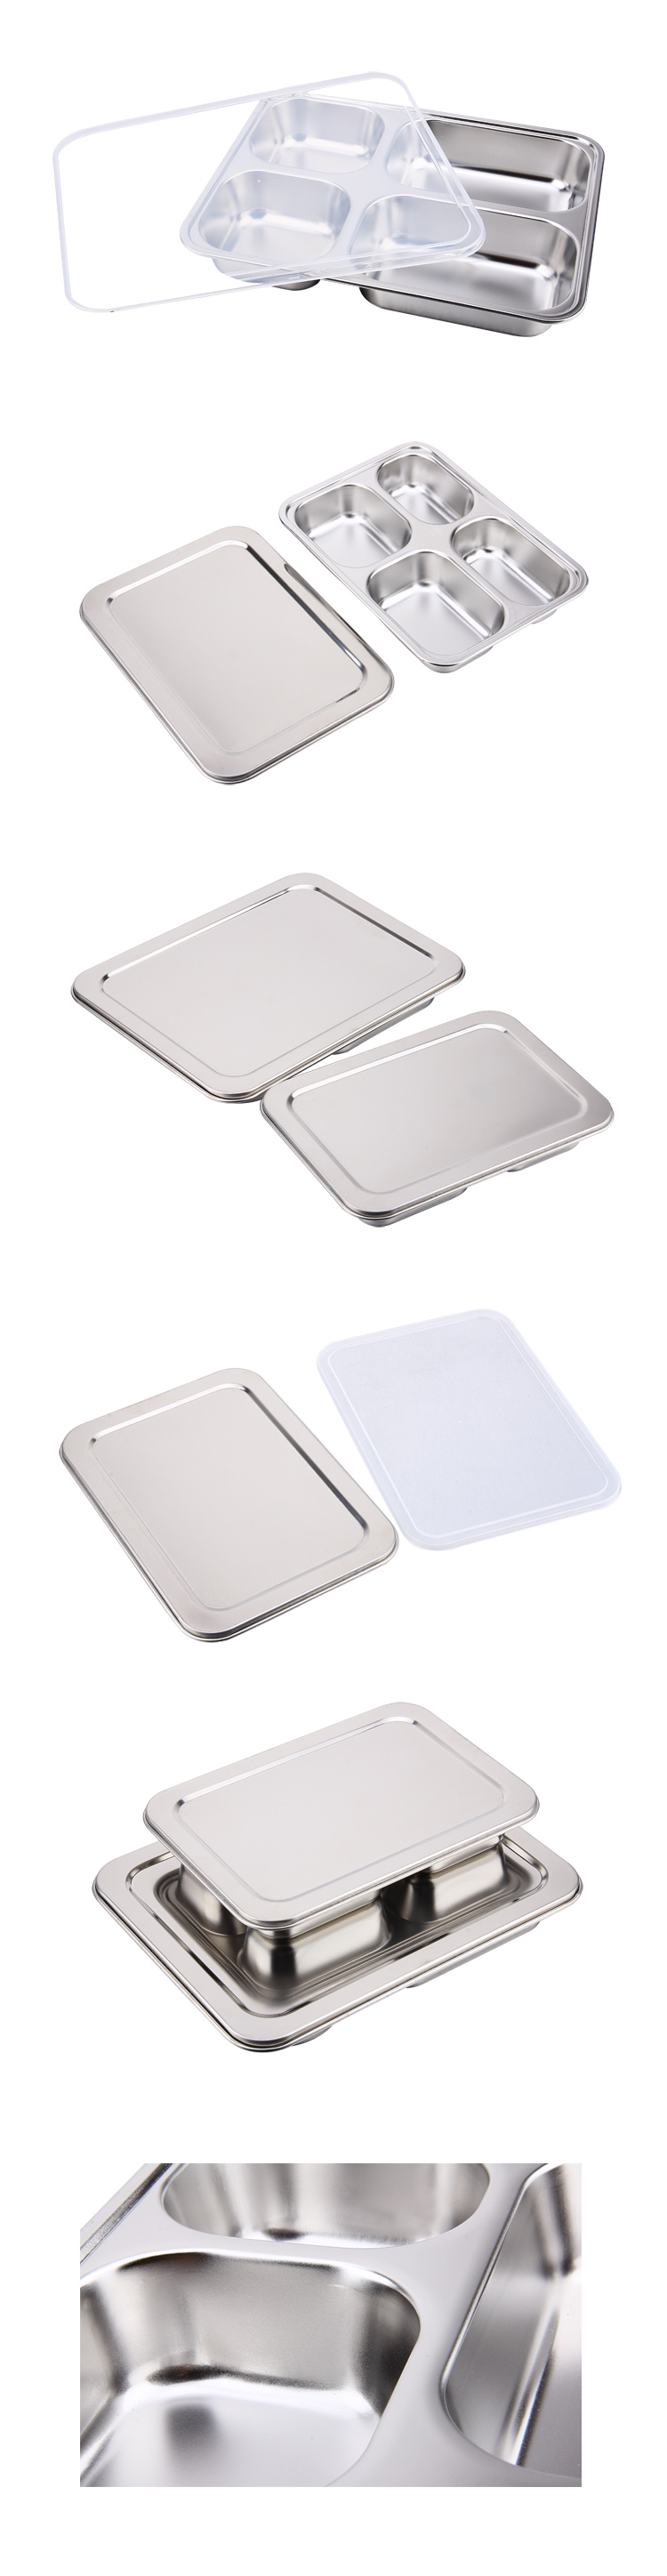 4 Grids 304 Stainless Steel Dinner and Lunch Plate Container